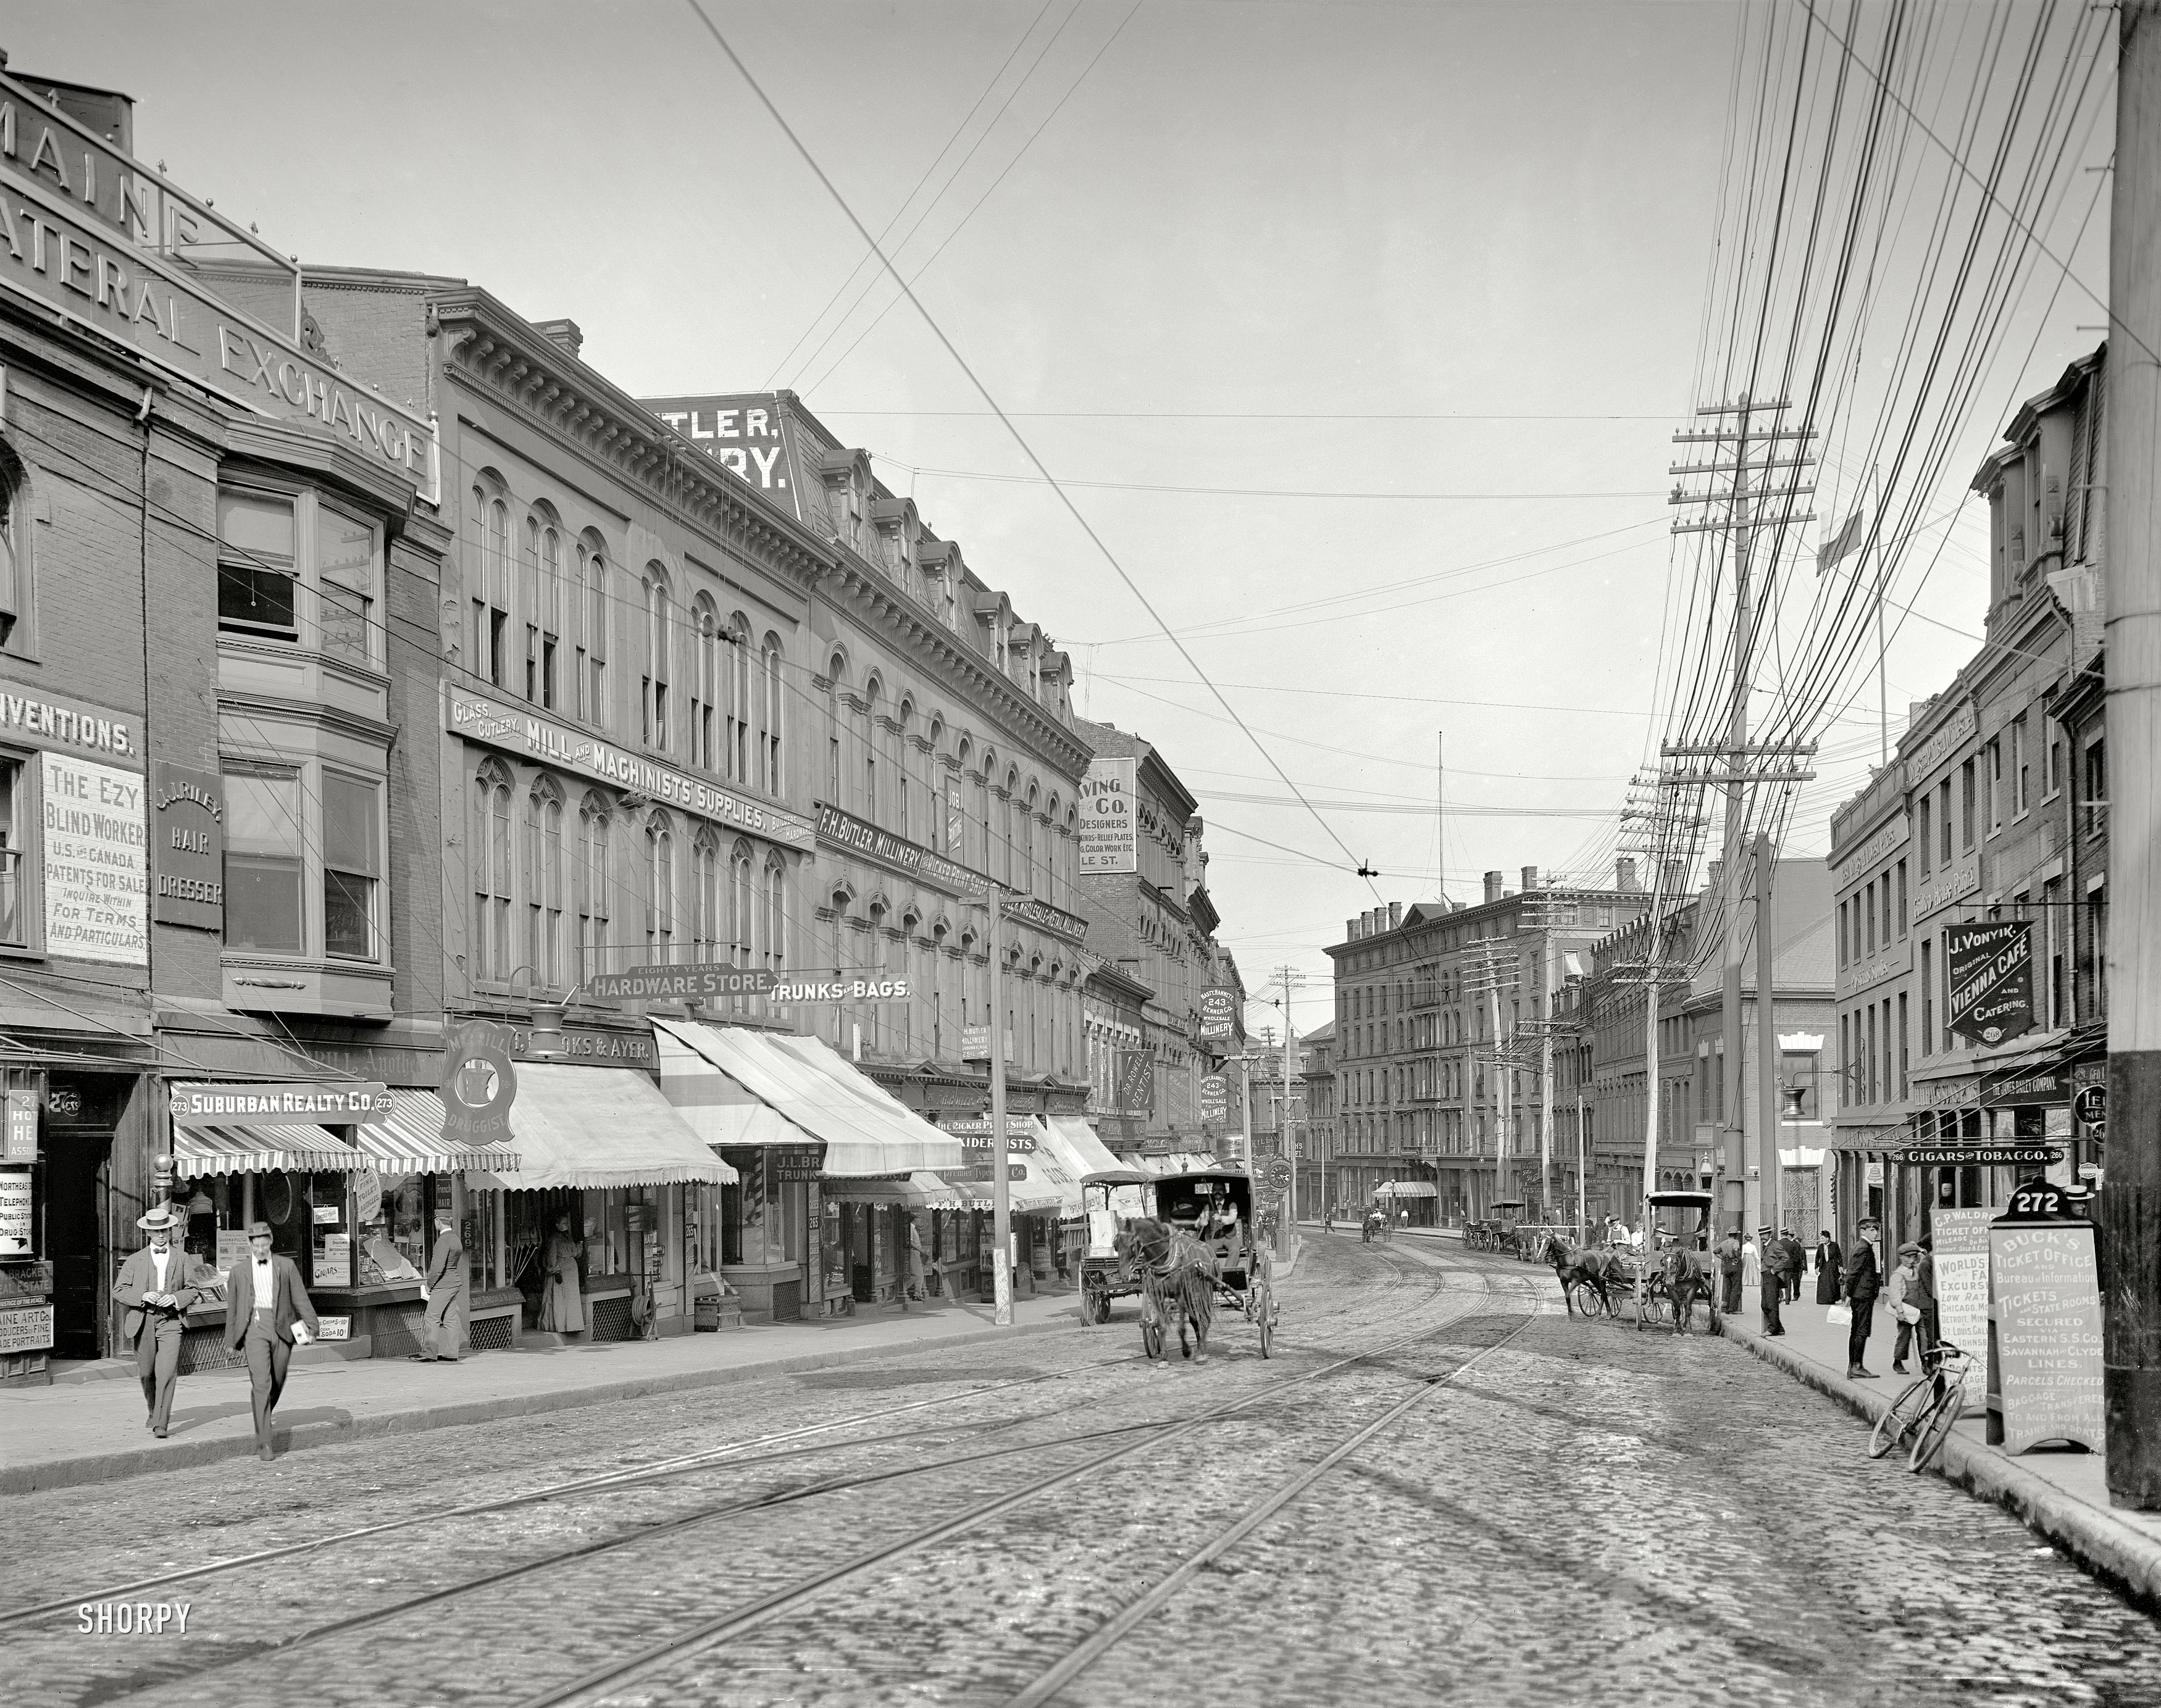 Portland, Maine, circa 1904. "Middle Street." Much signage for various goods and services including Taxidermy, Trunks & Bags and "The Ezy Blind Worker." Something to do with window shades, maybe, or a kind of libertine Helen Keller. 8x10 inch dry plate glass negative, Detroit Publishing Co. View full size.